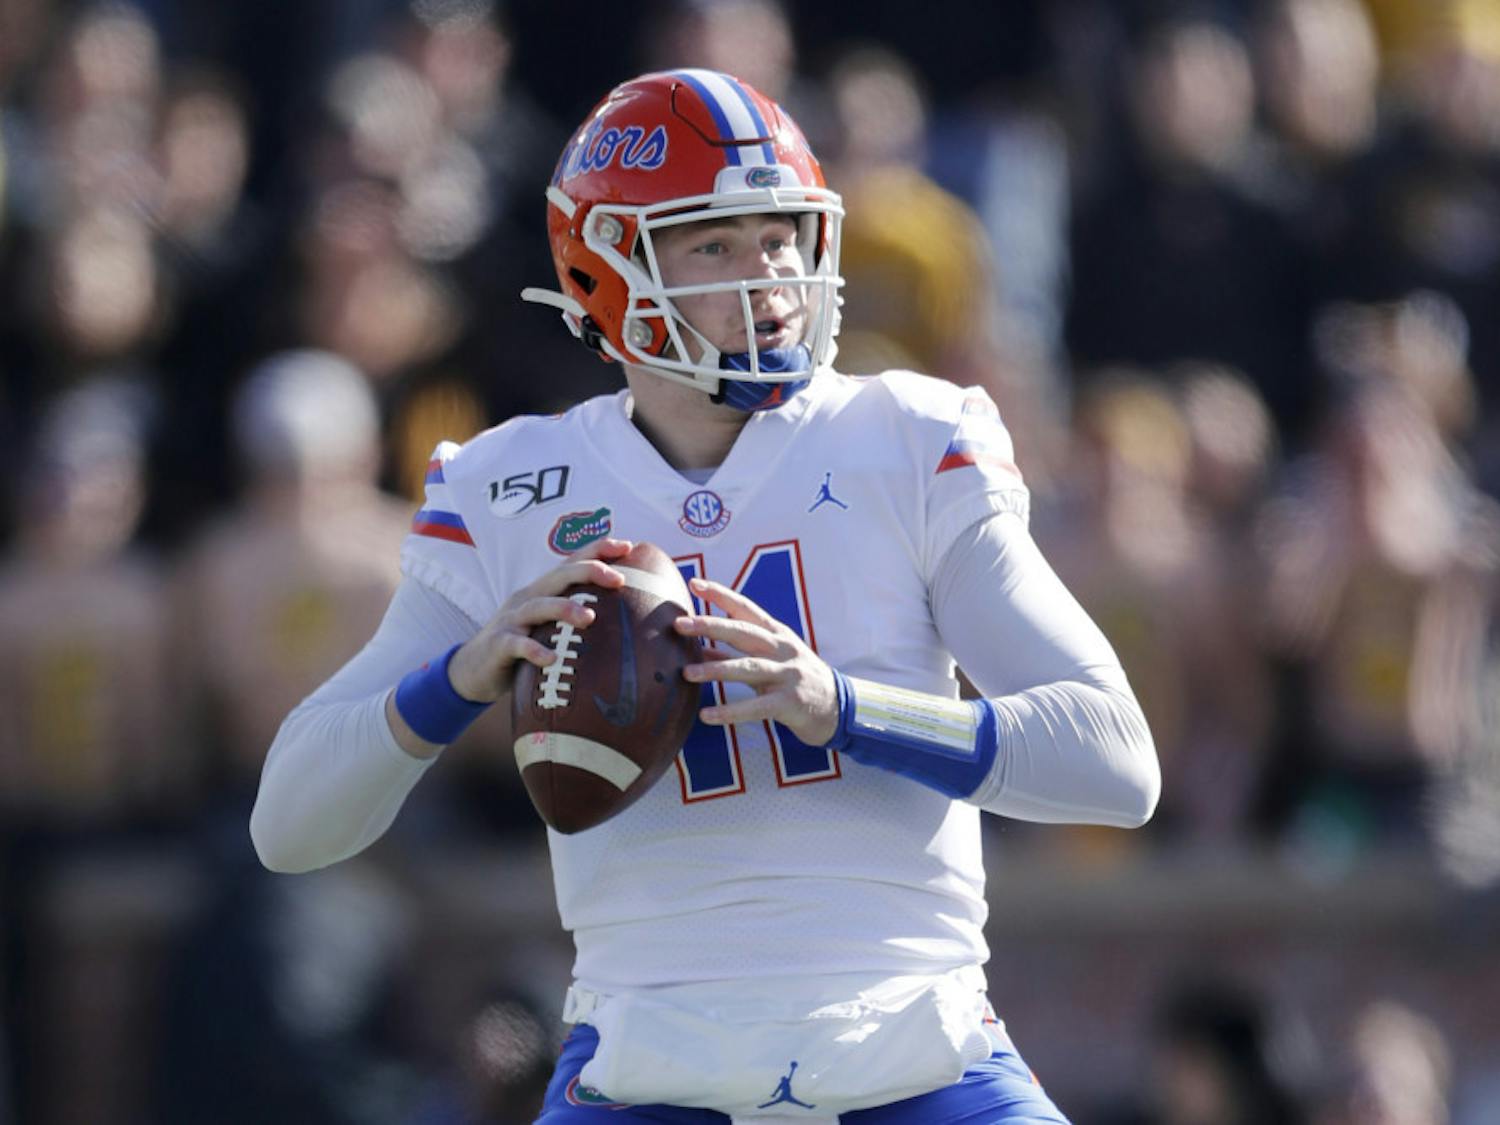 Quarterback Kyle Trask is third in the SEC in passing touchdowns and yards per attempt.